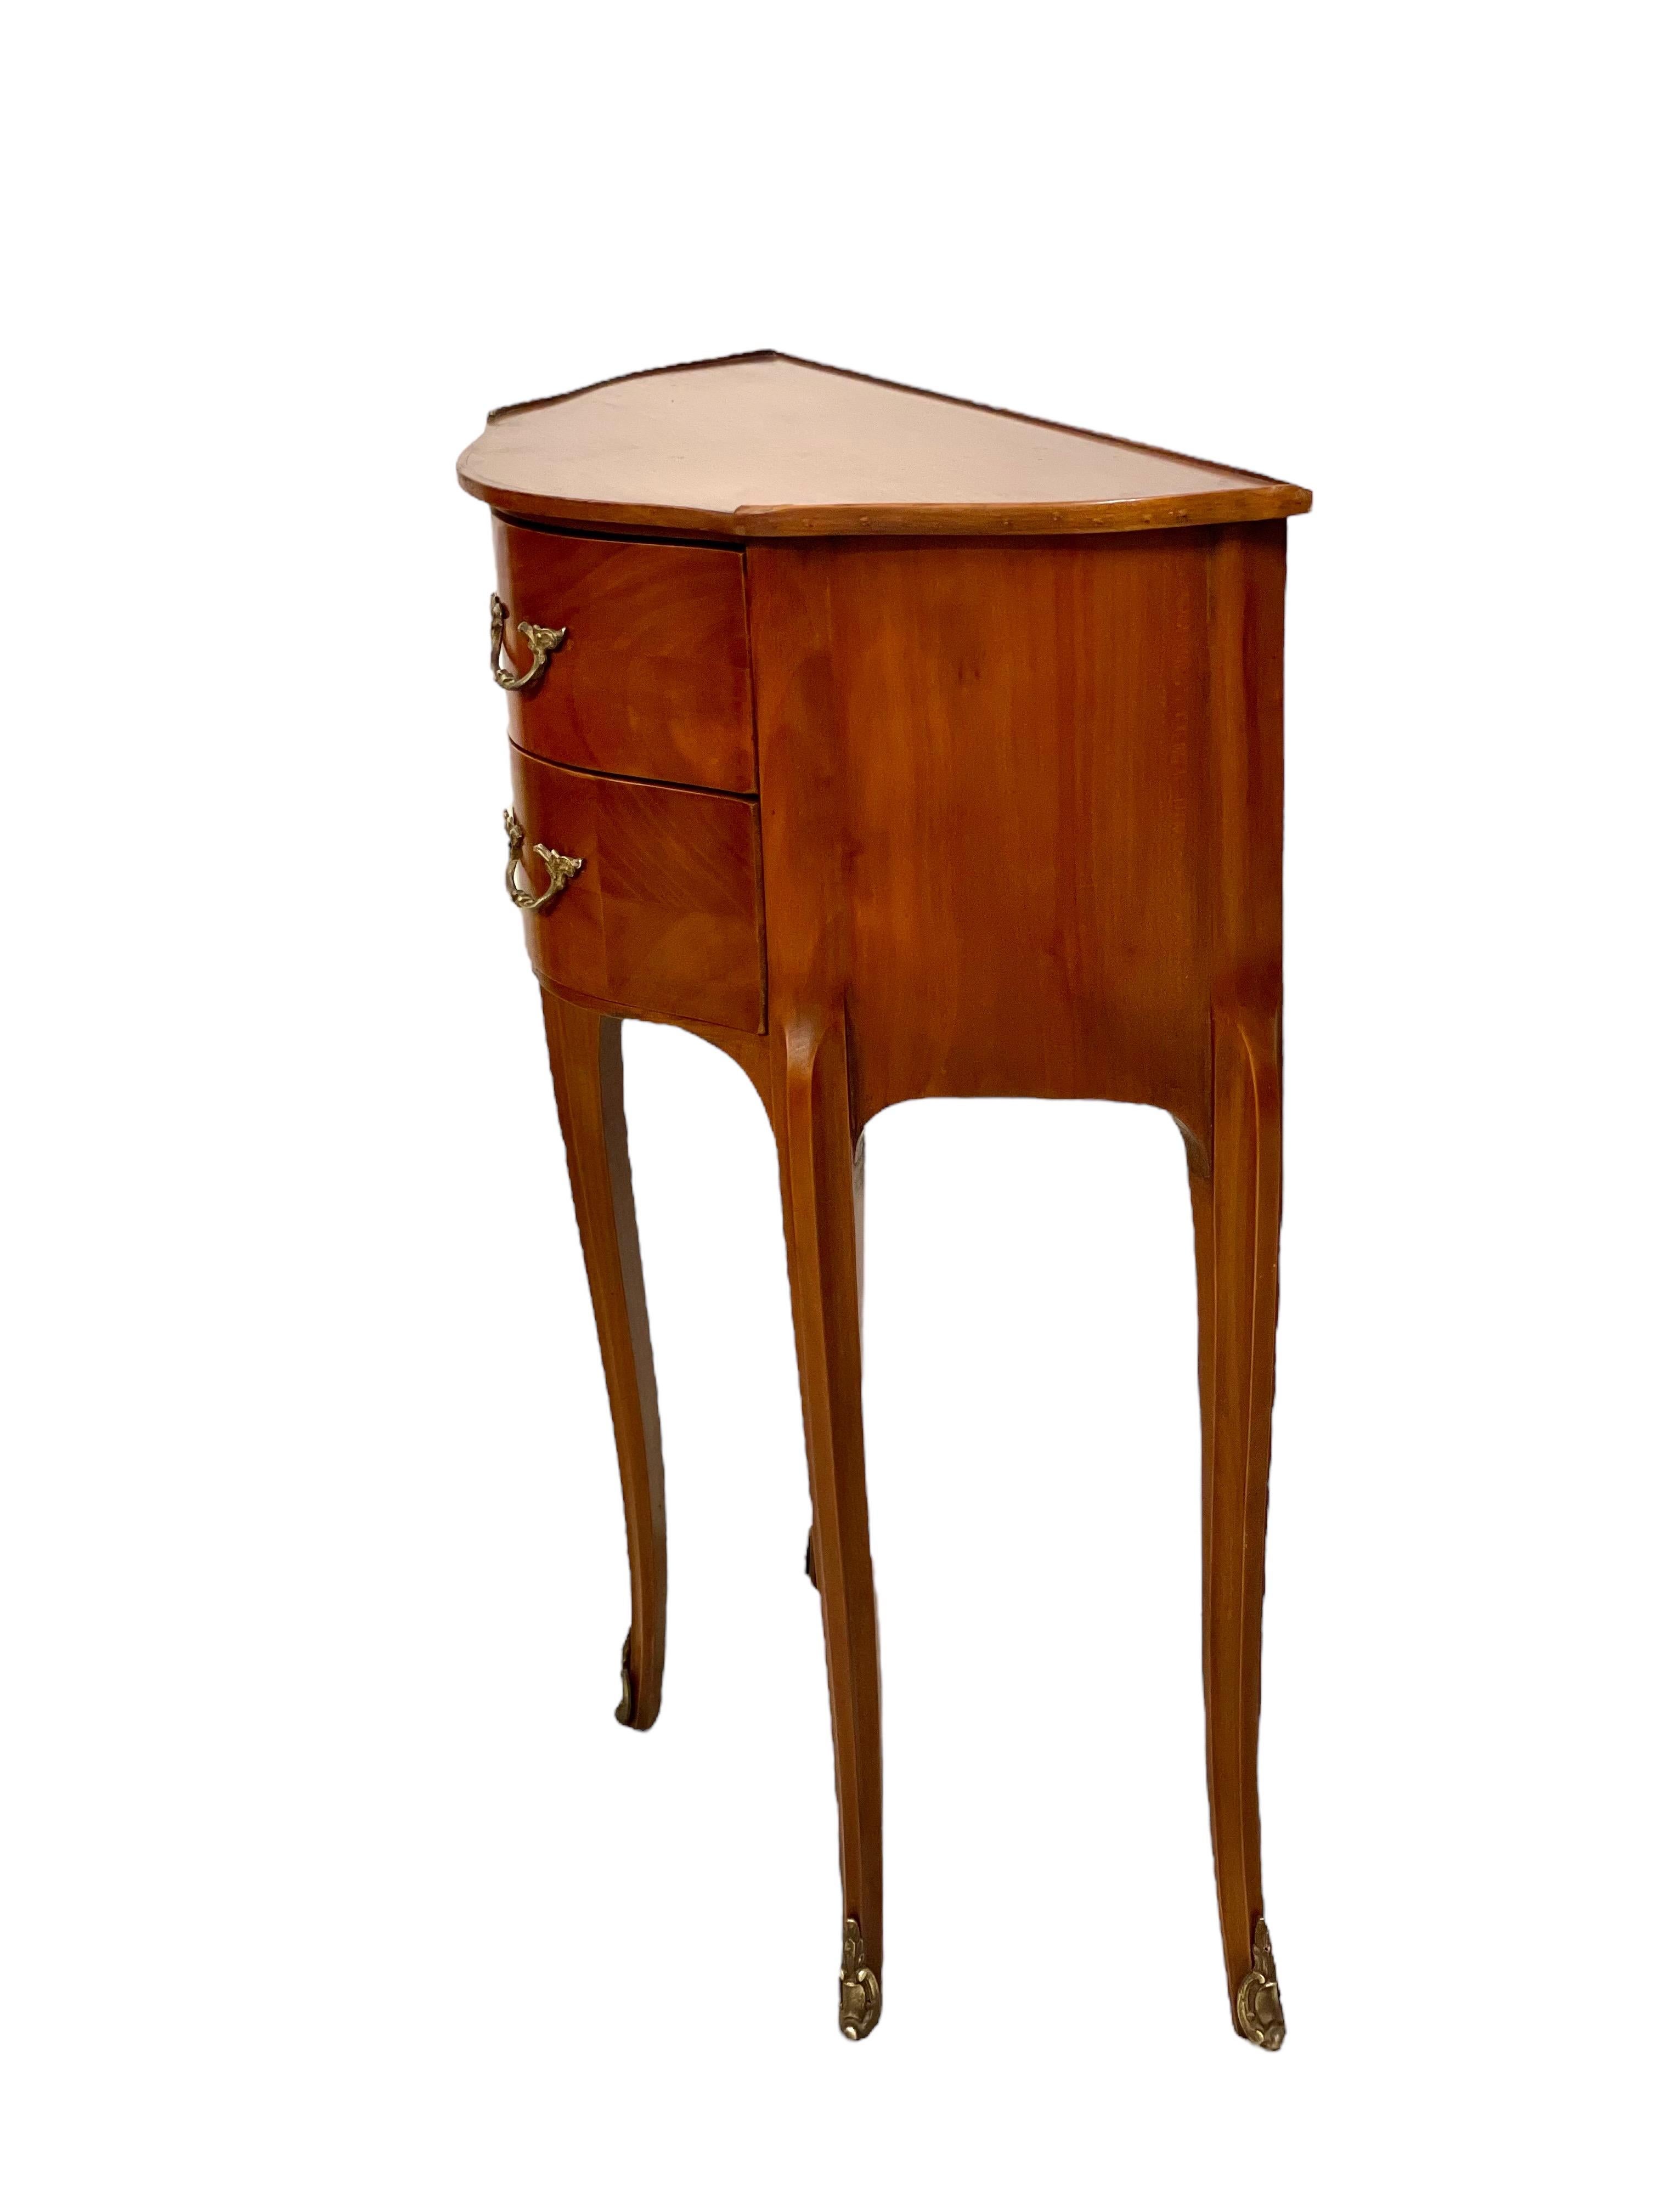 A beautiful demi-lune bedside cabinet, with elegant serpentine front and two drawers. This practical and attractive commode echoes the Louis XV style, and features two capacious drawers, a polished wooden top, and is raised above curving cabriole